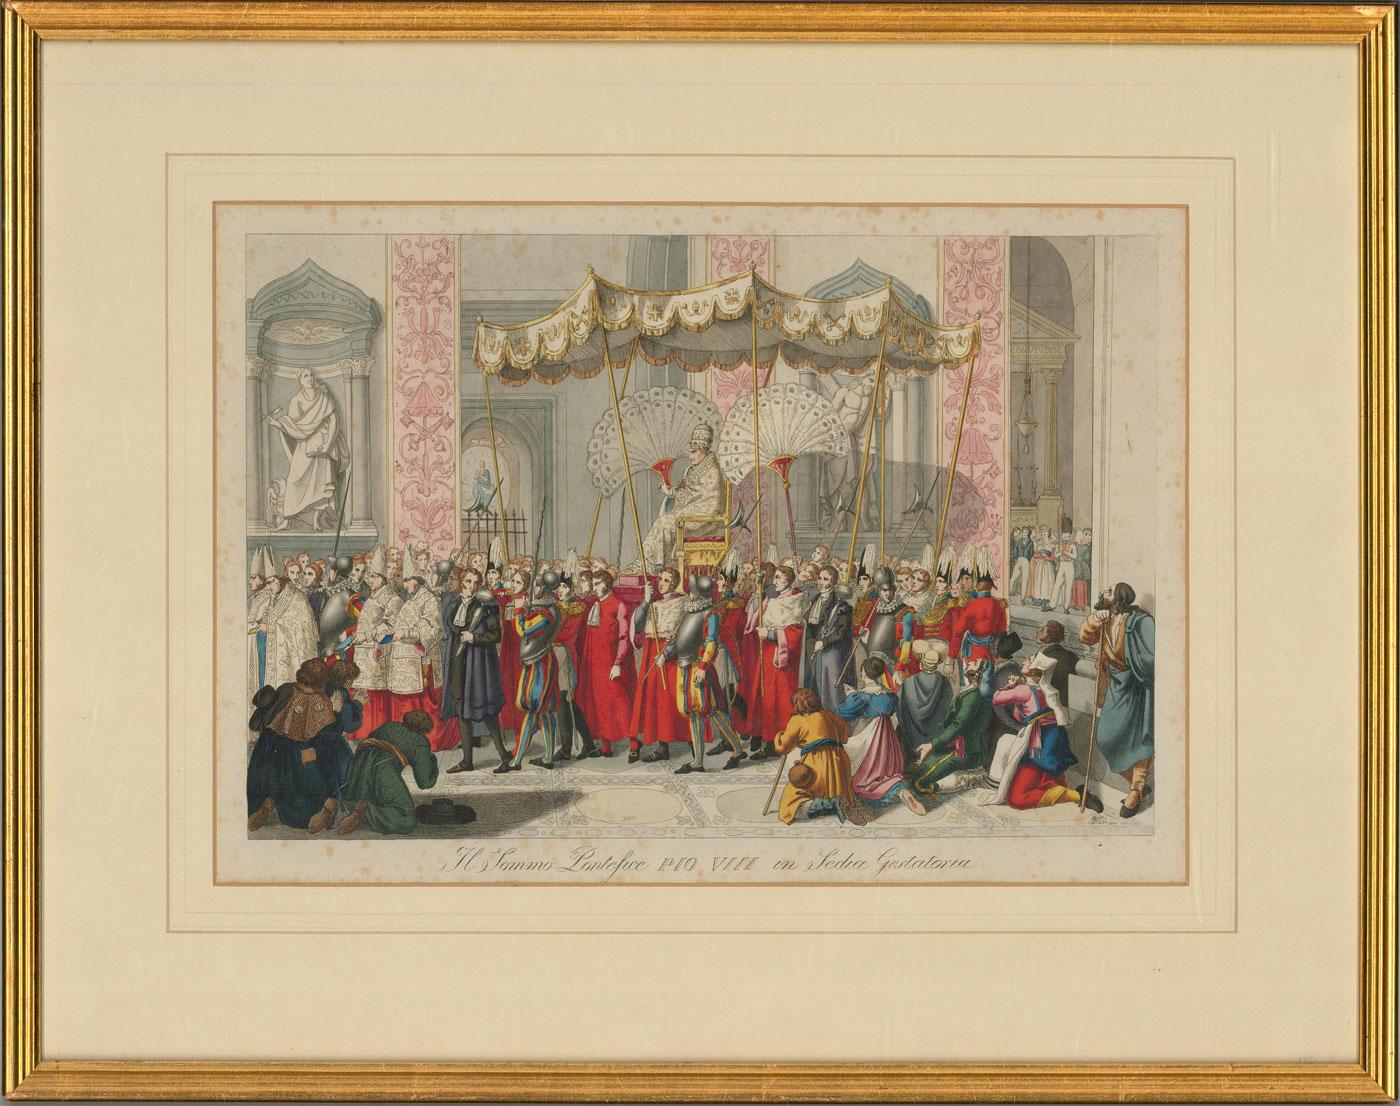 A hand coloured copperplate engraving by Filippo Ferrari (1819-1897), showing Pope Pius VII being carried in a gestatorial chair in procession. The artist has hand coloured in a vibrant palette. This accomplished engraving is full of rich